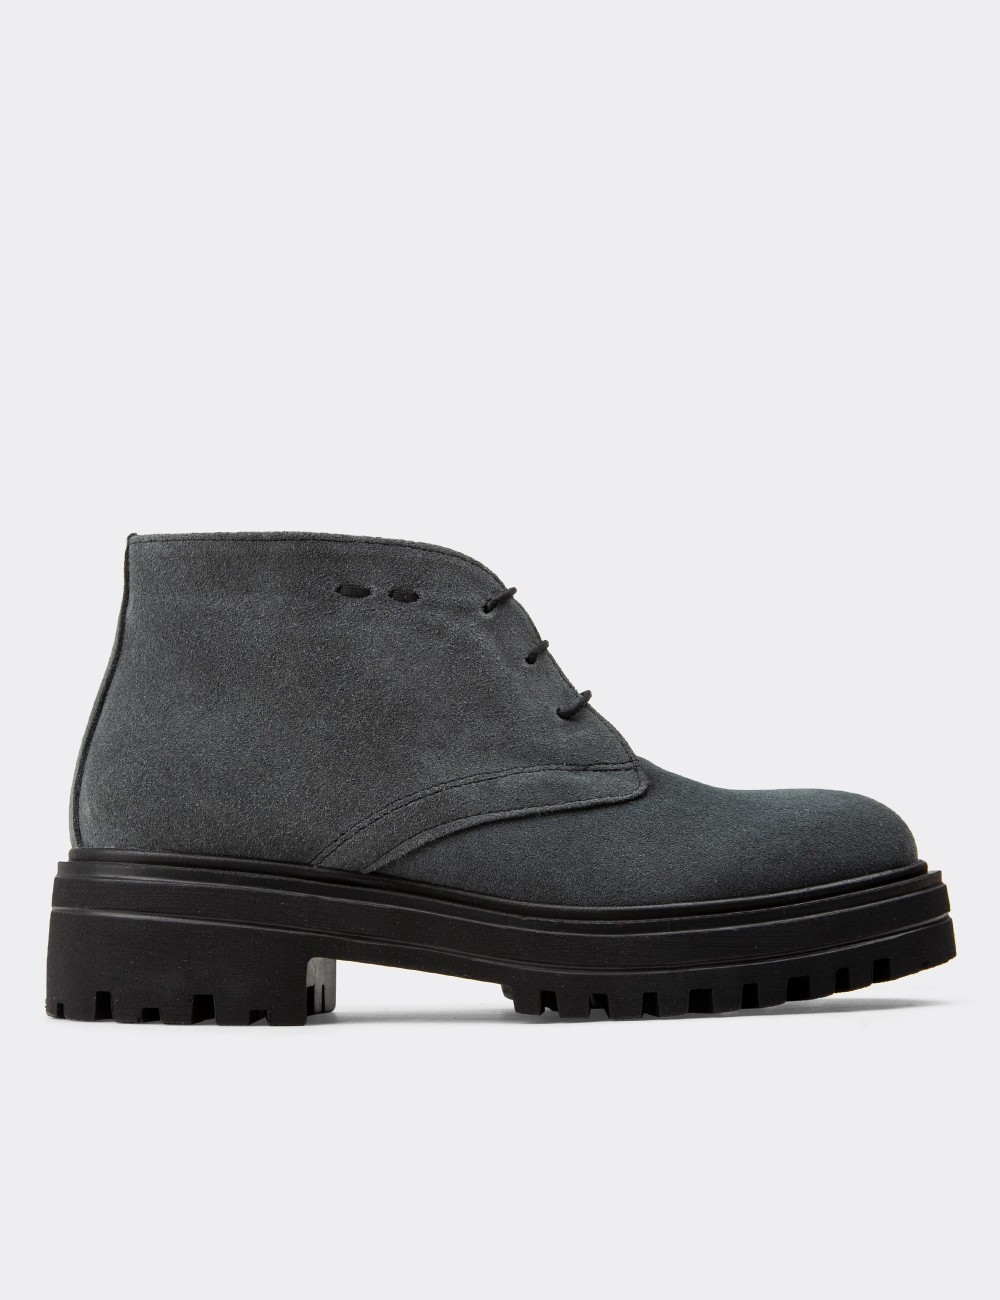 Gray Suede Leather Boots - 01847ZGRIE02